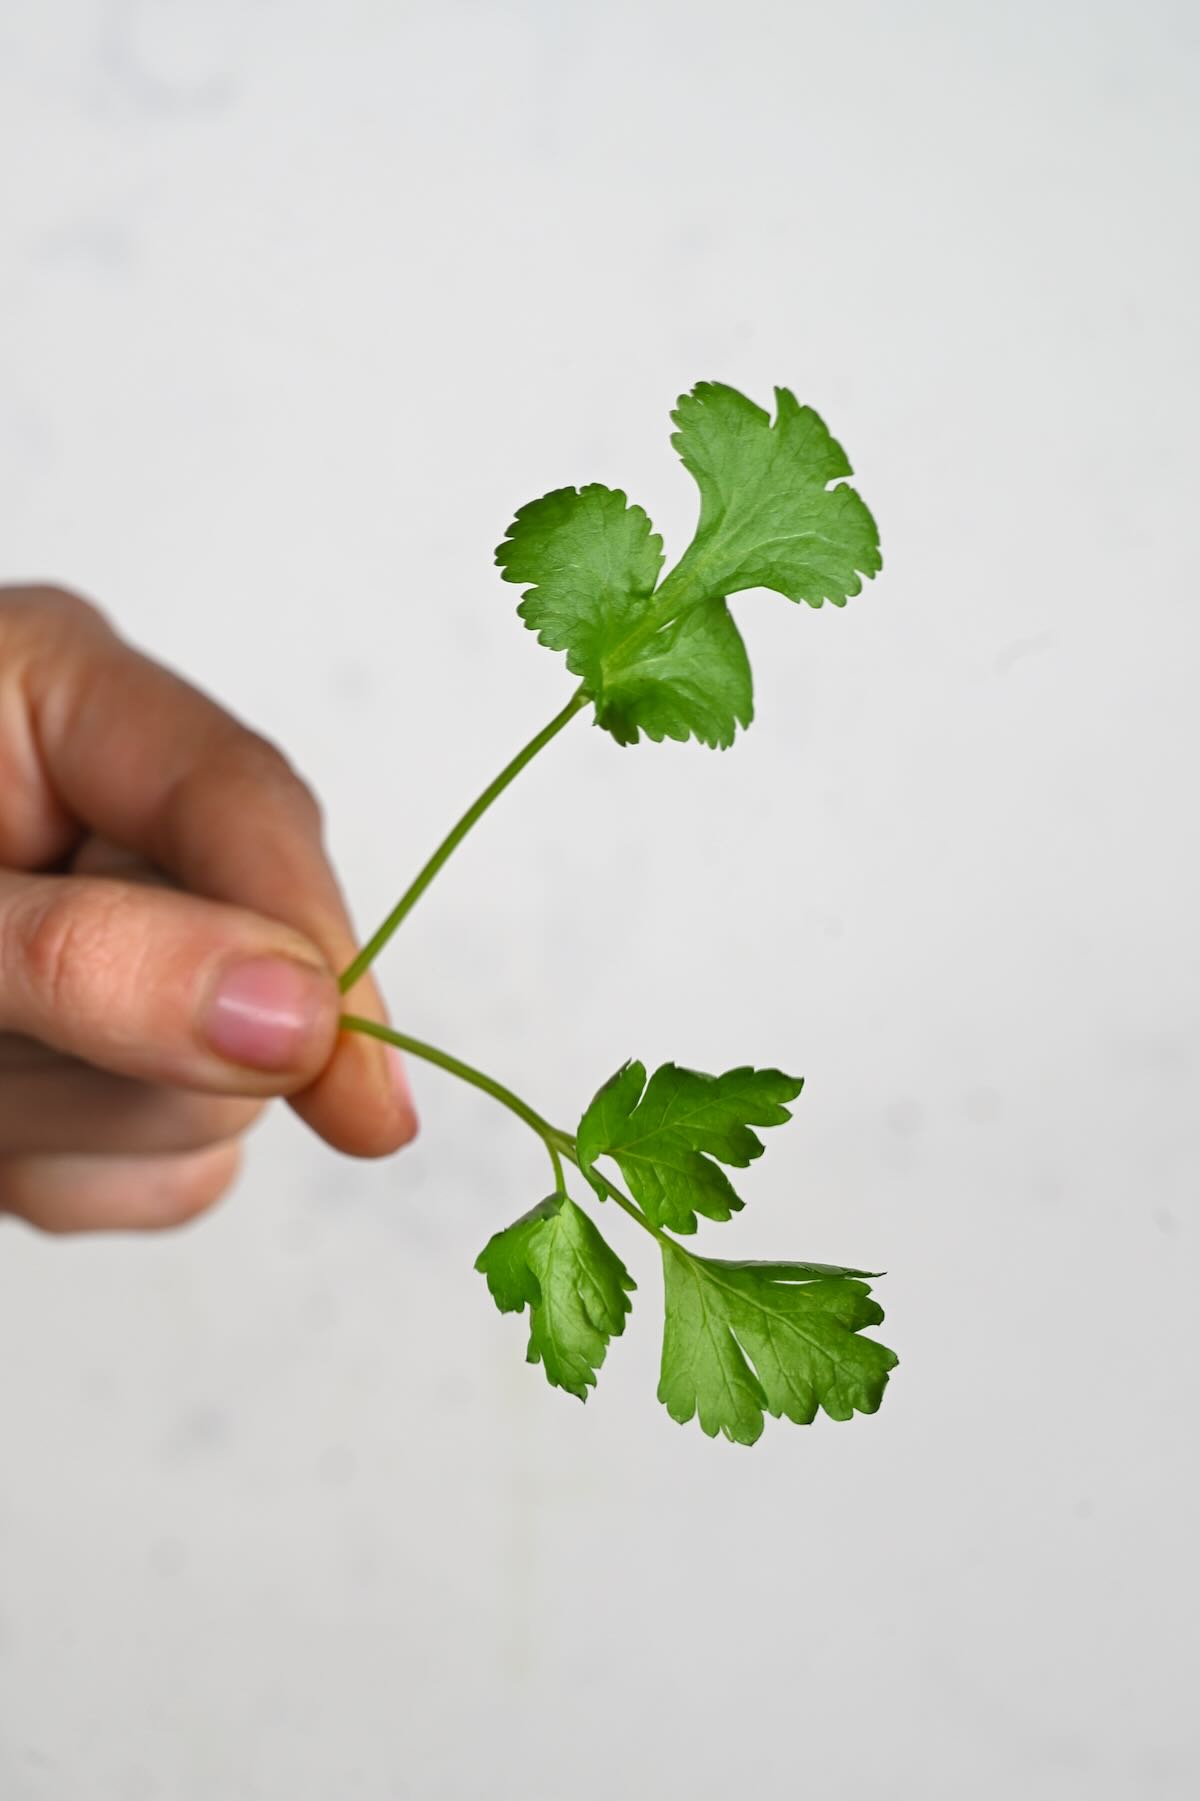 A stalk of parsley and a stalk of cilantro